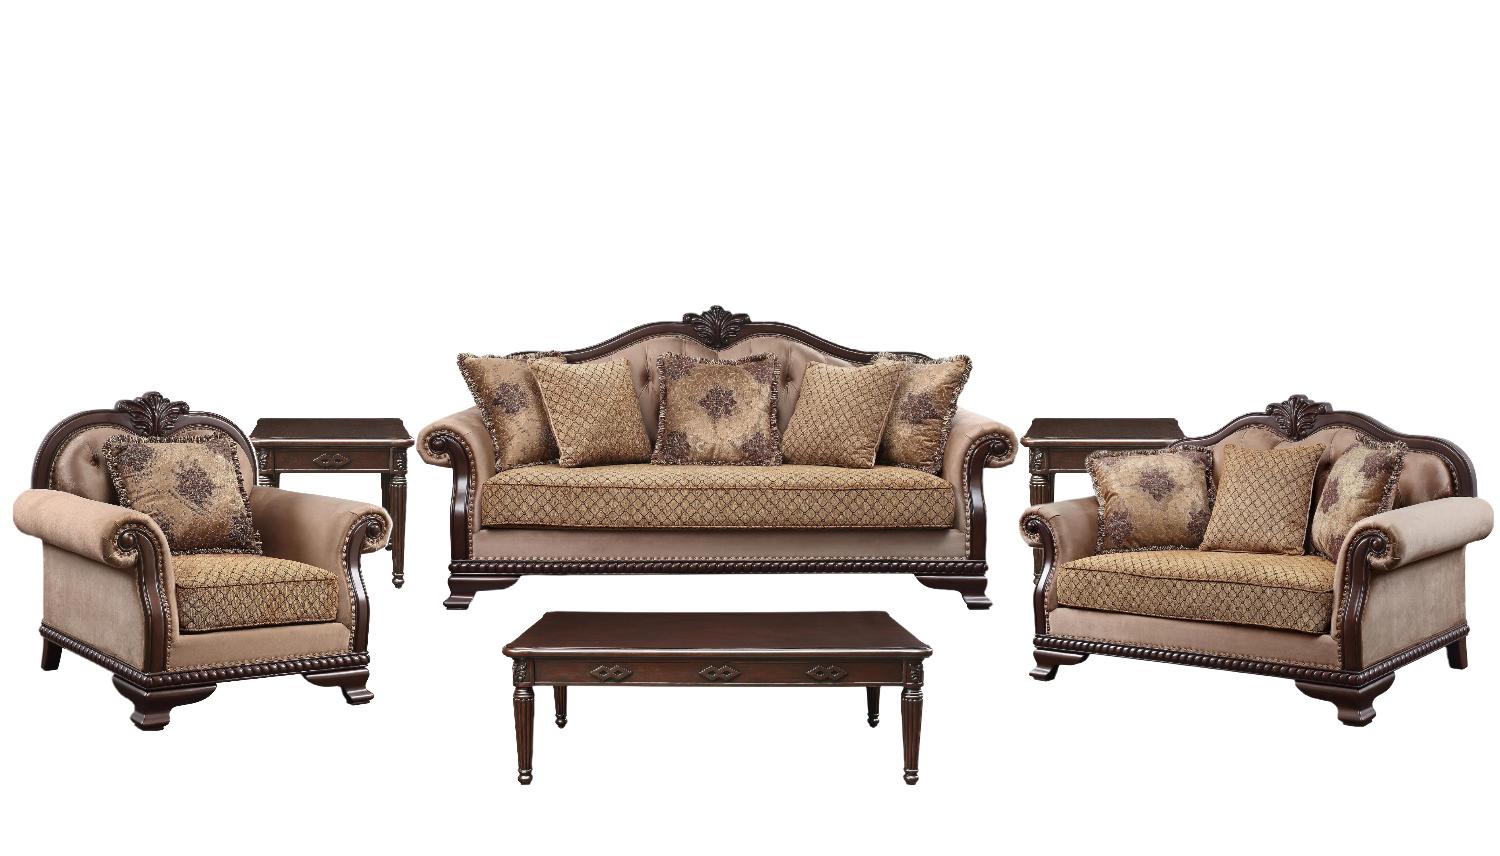 Classic Sofa Loveseat Chair Coffee Table Two End Tables Chateau De Ville 58265-6pcs in Tan Fabric